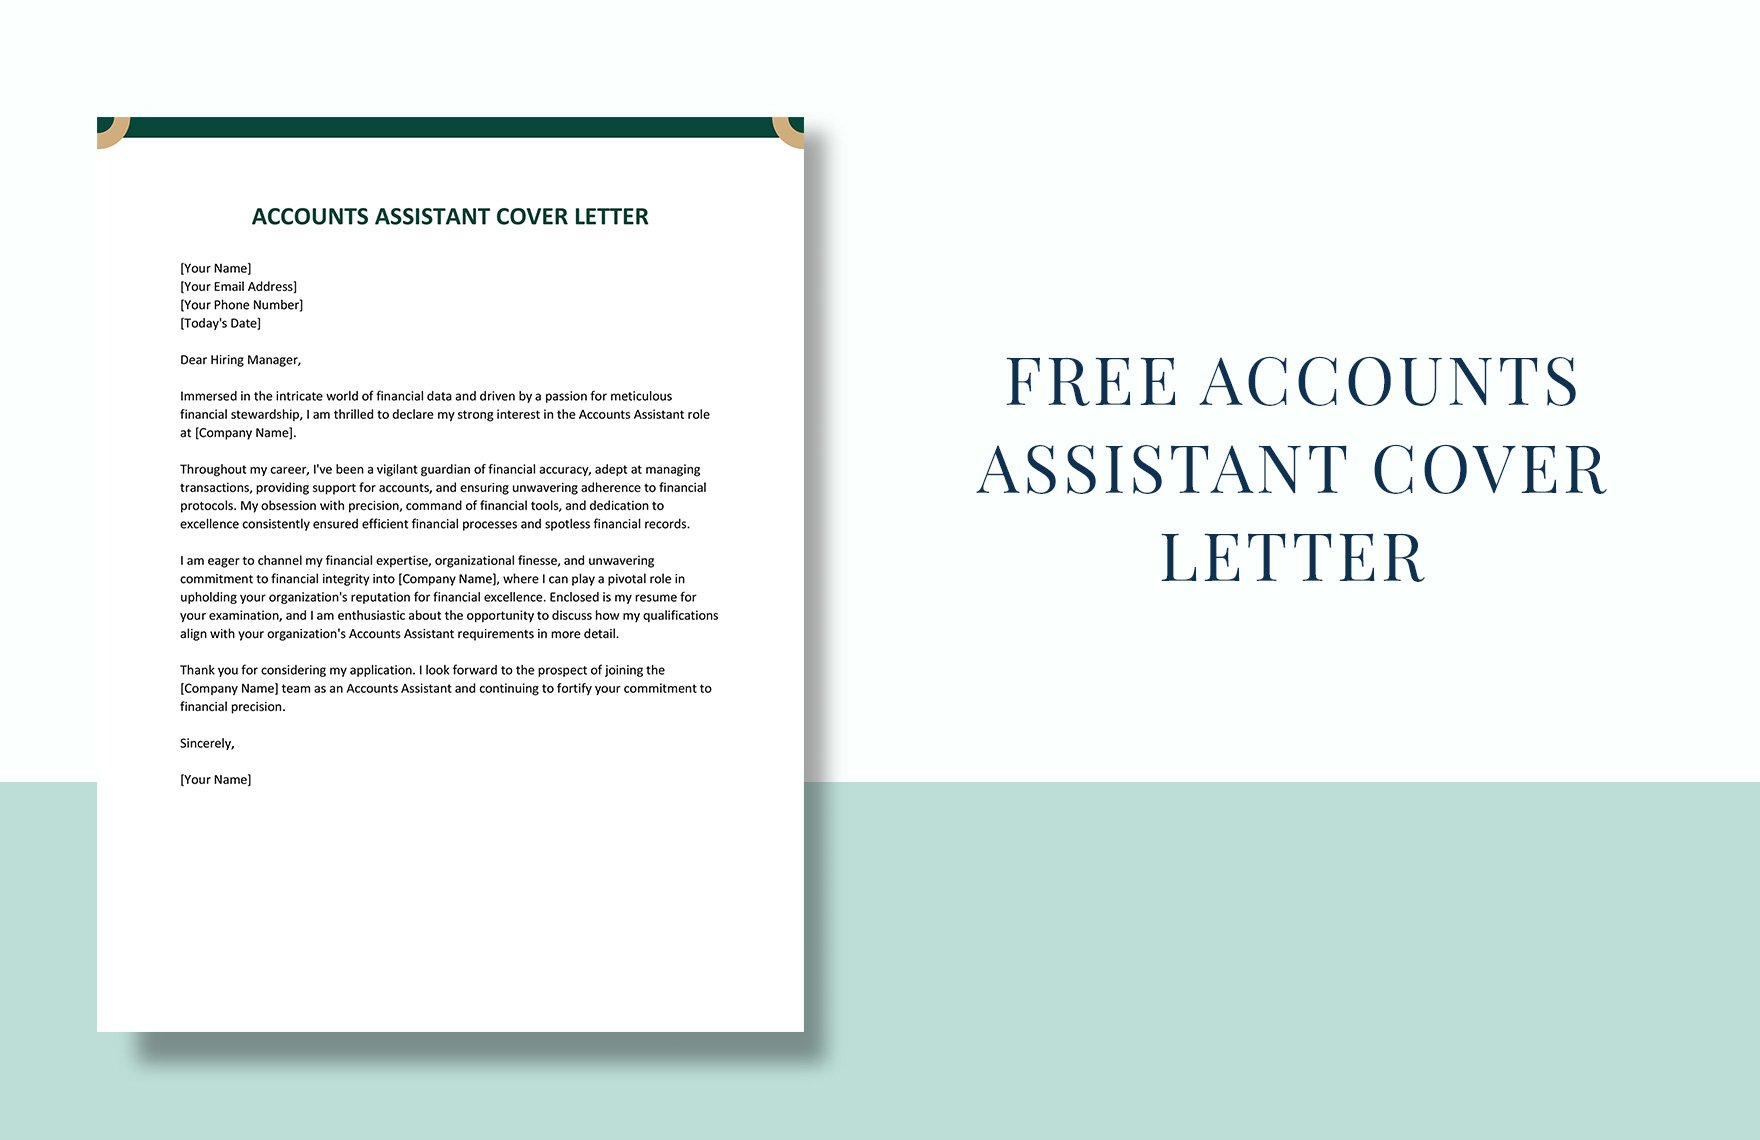 Accounts Assistant Cover Letter